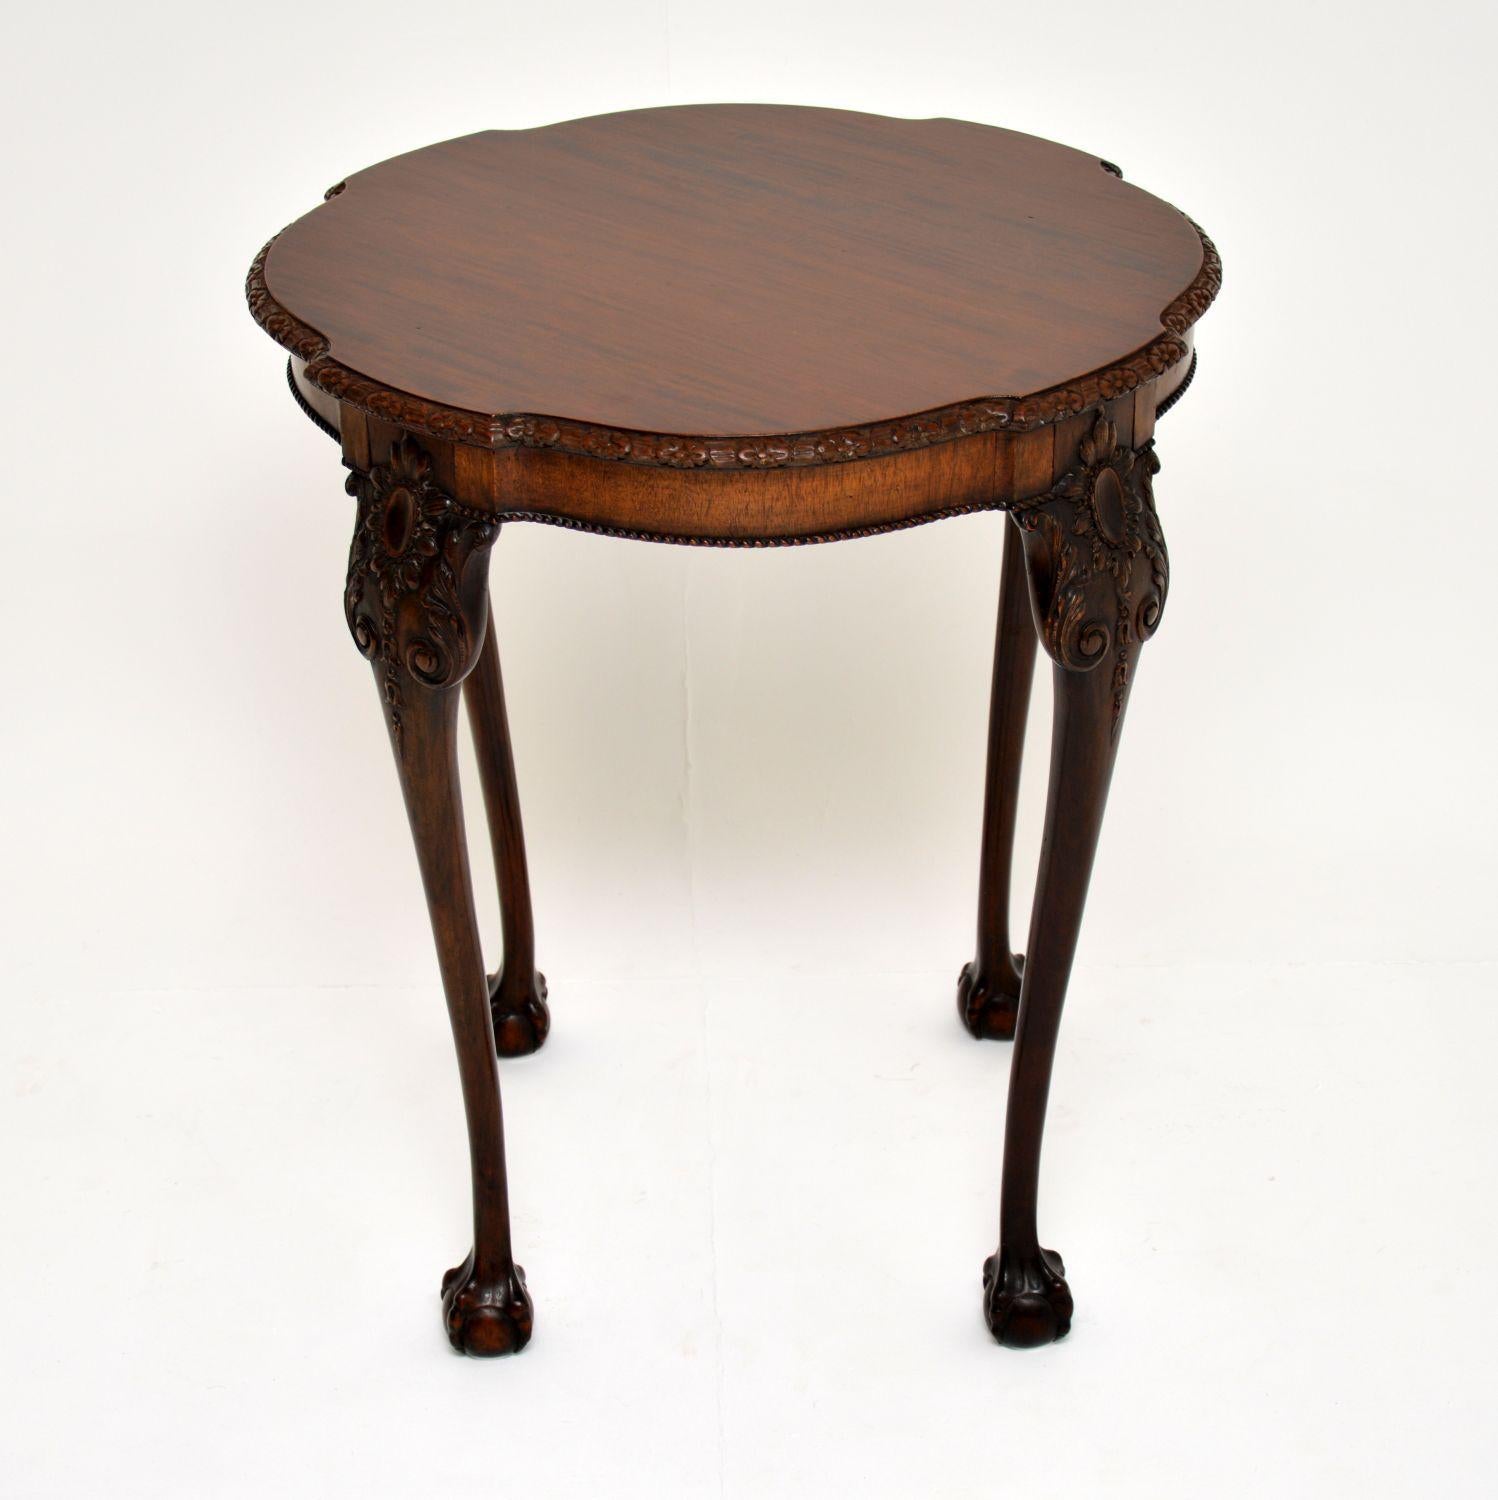 Antique Edwardian Chippendale style solid mahogany occasional table with extremely fine carvings and in excellent original condition.

This table which dates from the 1890-1900 period has a shaped top with carving around the top edge and deep